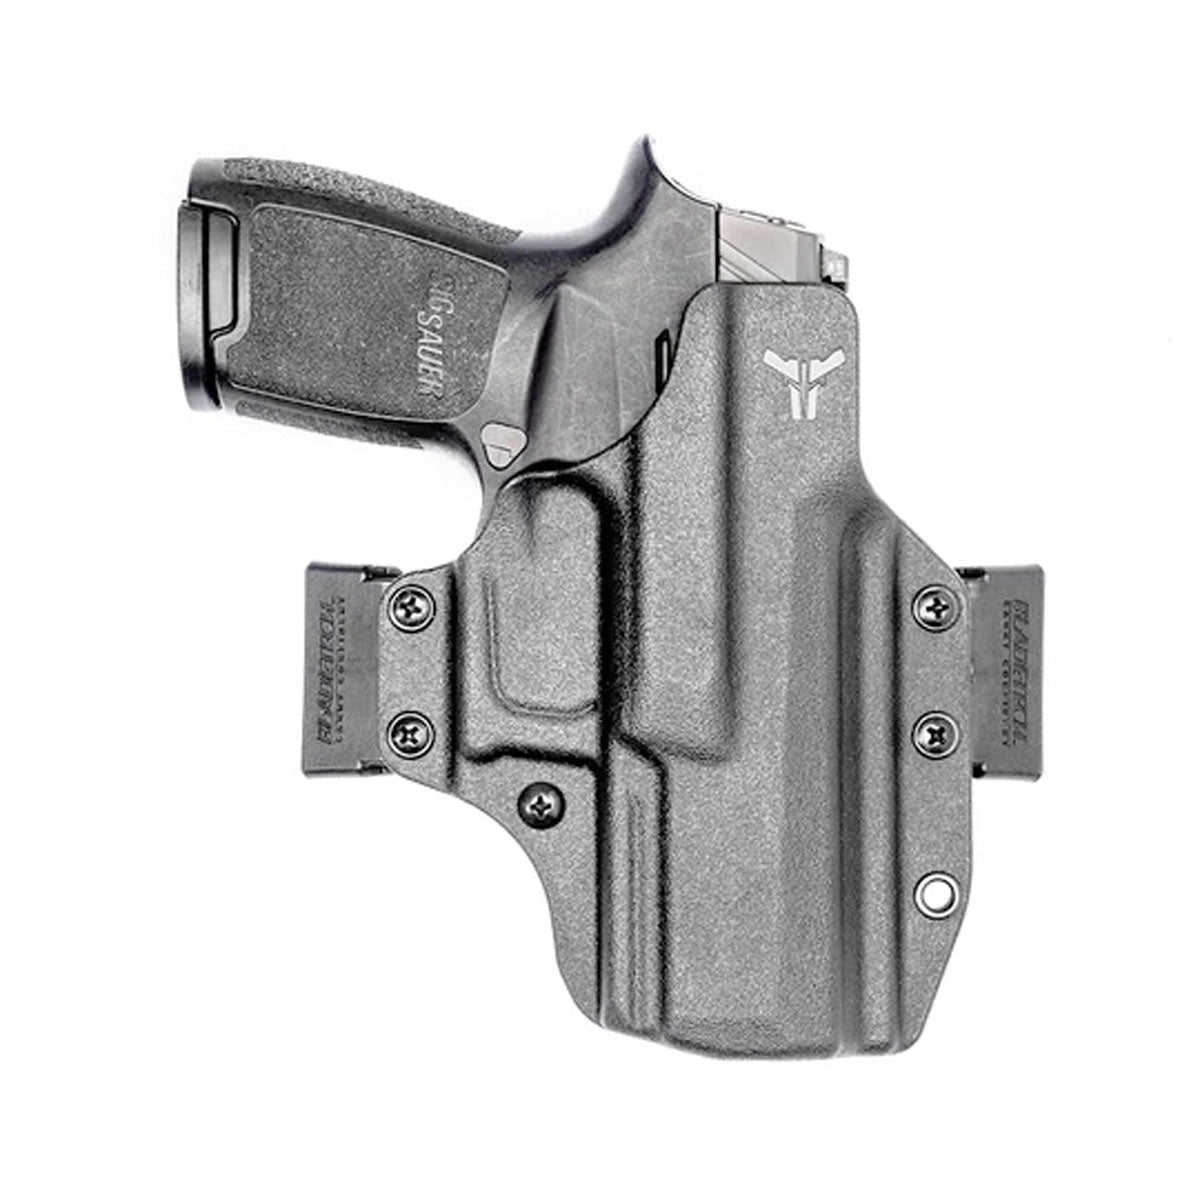 Blade-Tech Total Eclipse OWB Holster Holsters Blade-Tech Holsters Sig 320C Tactical Gear Supplier Tactical Distributors Australia